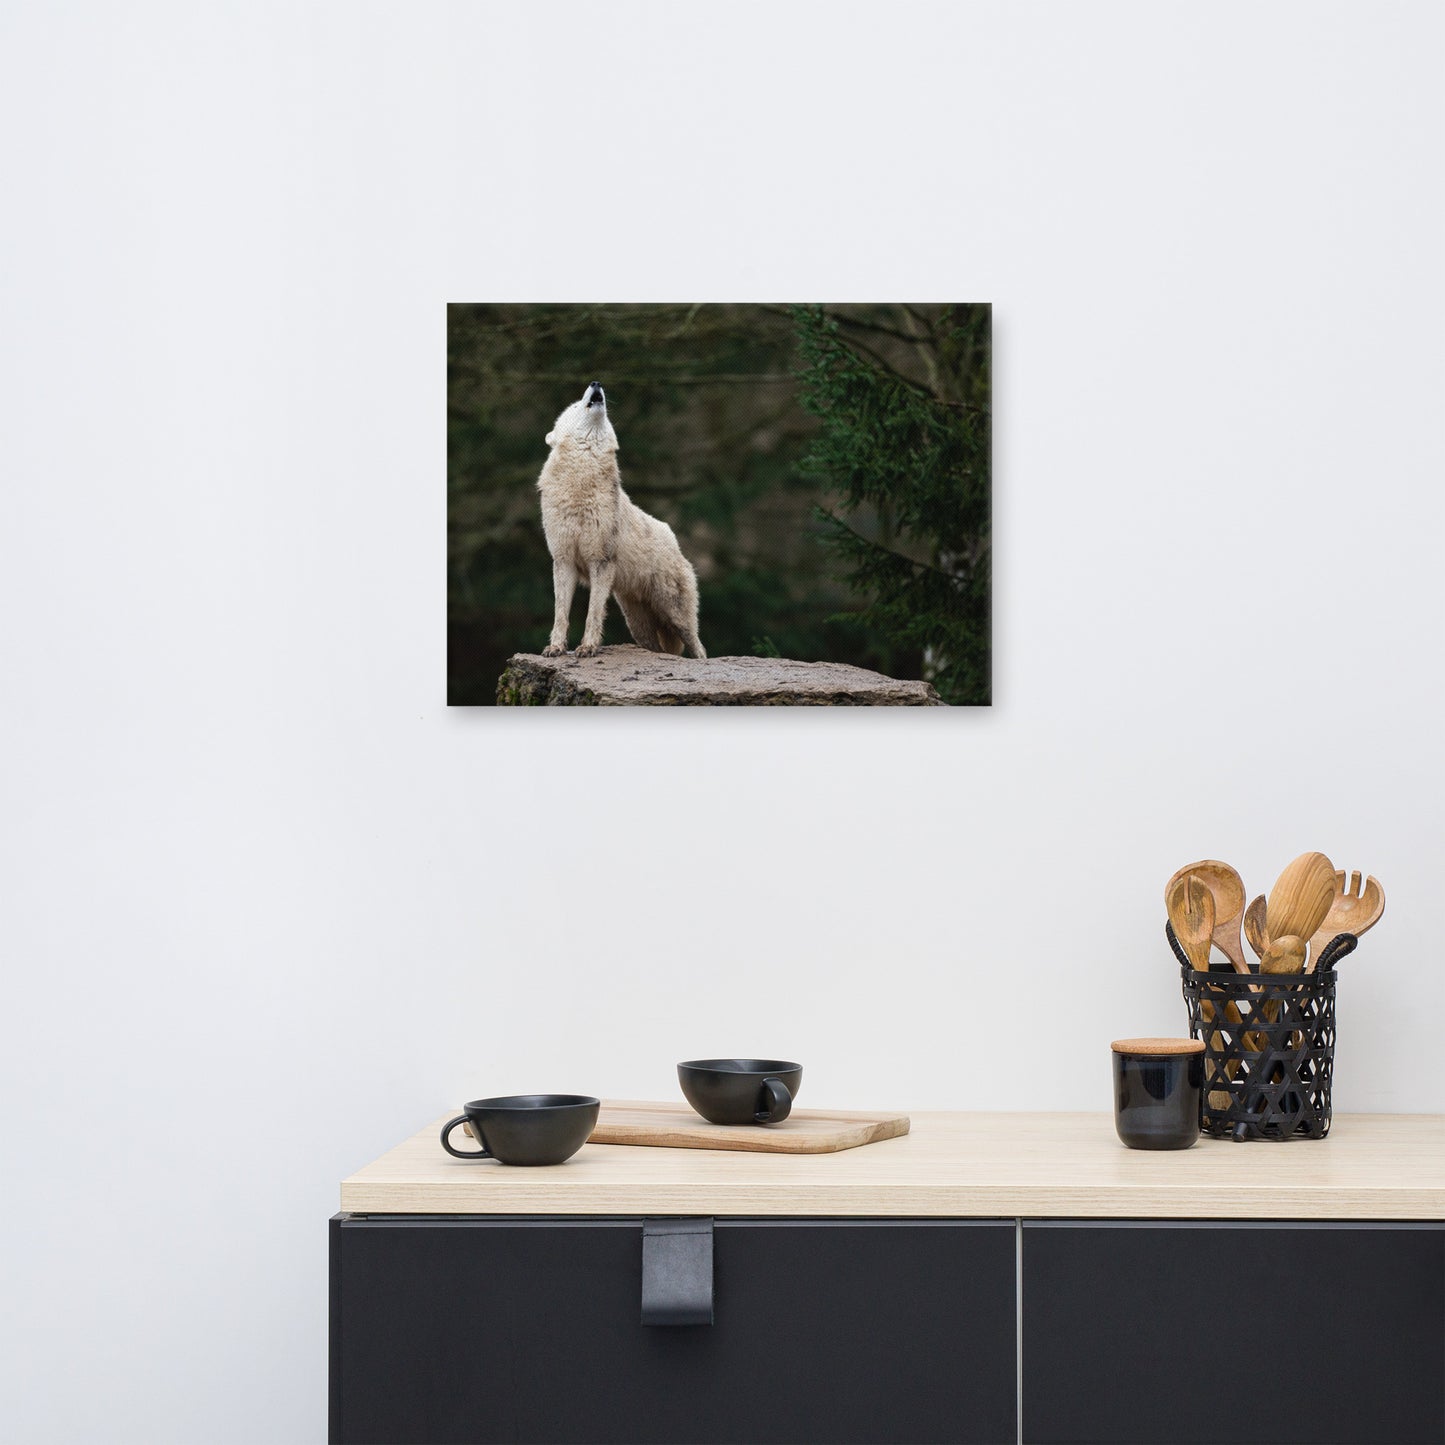 Howling White Wolf In The Forest Animal Wildlife Photograph Canvas Wall Art Print